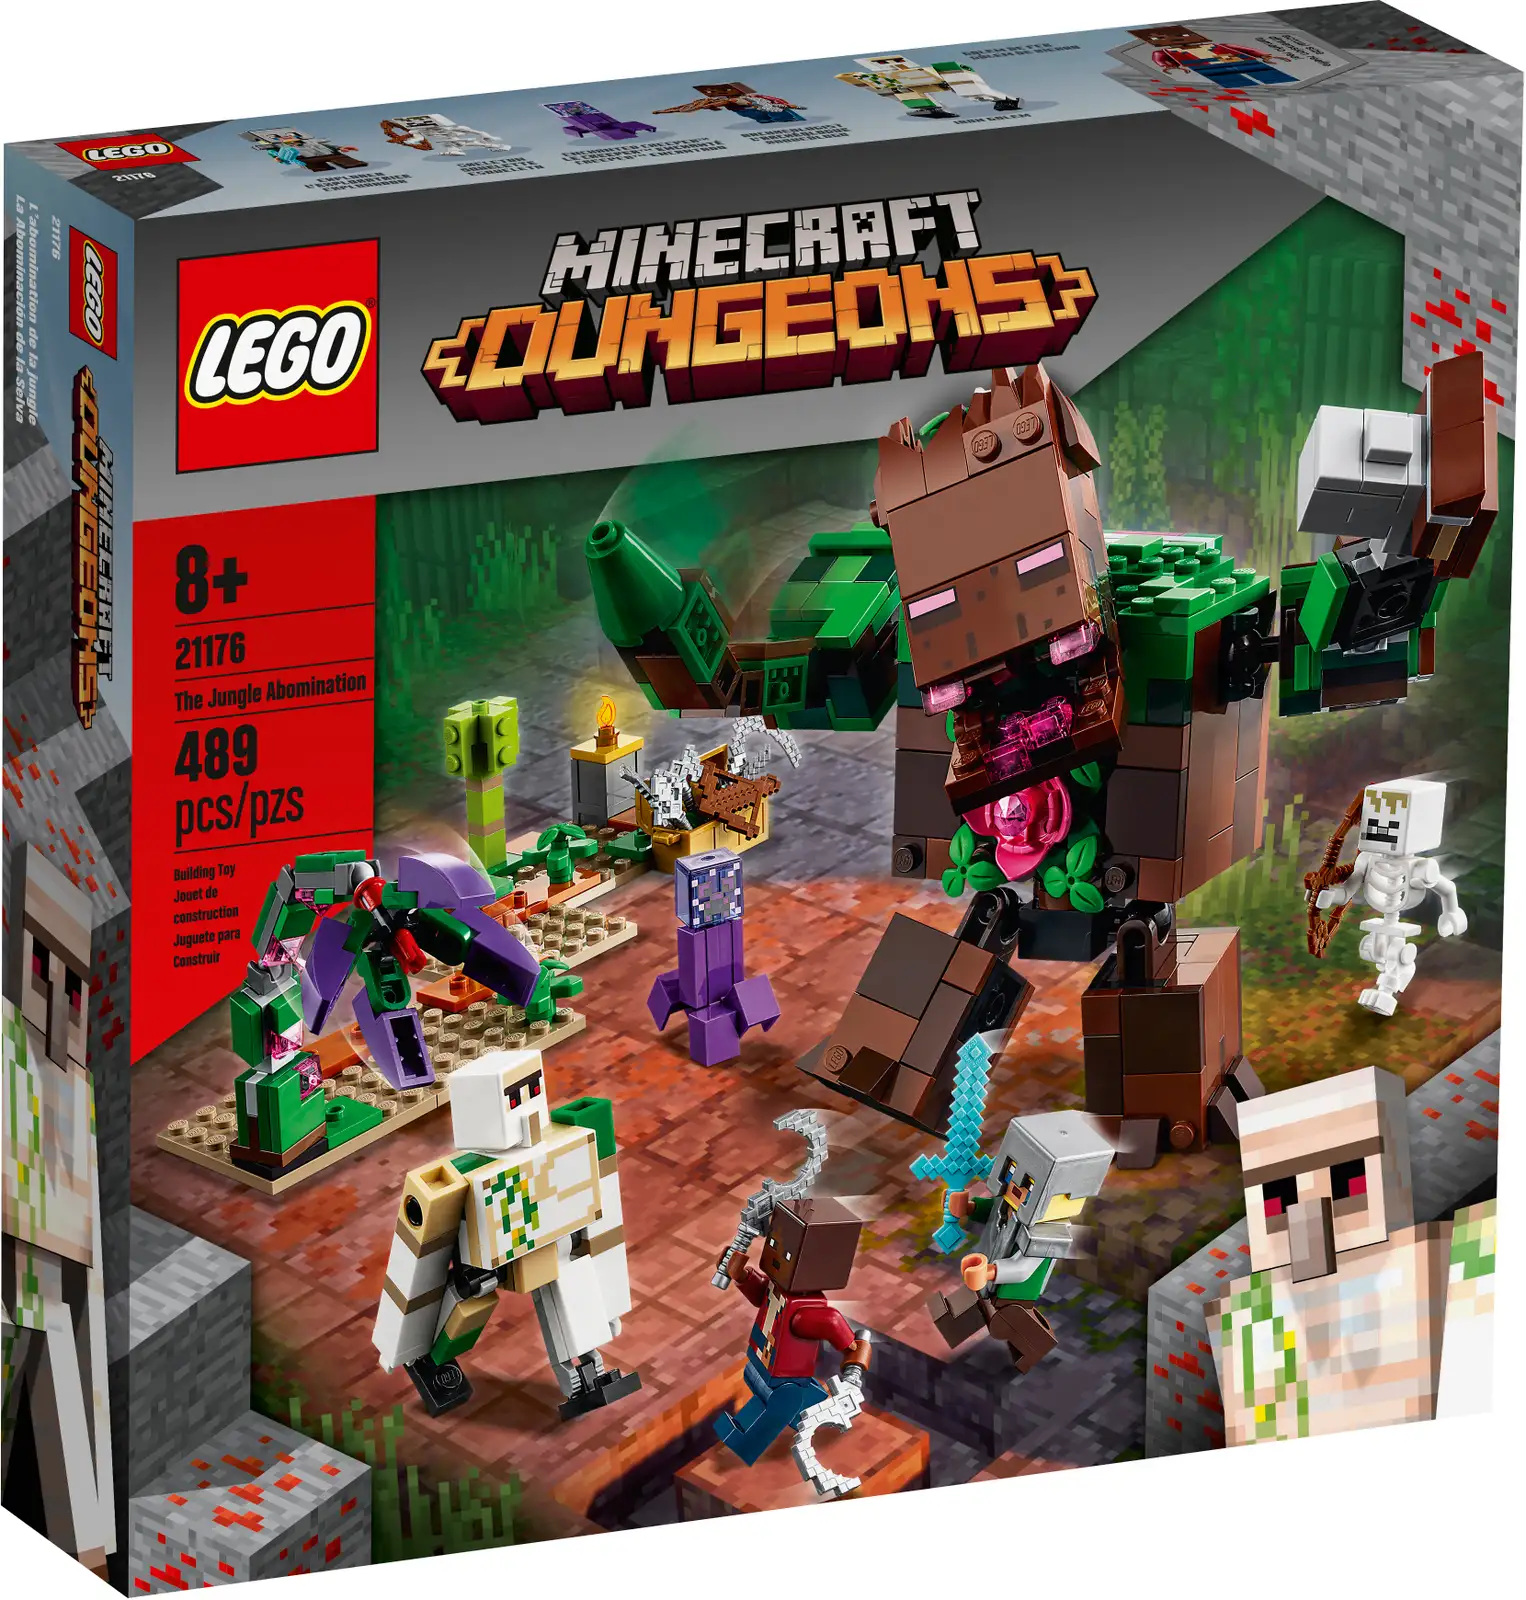 No one is safe in the jungle with LEGO® Minecraft™ The Jungle Abomination (21176). This creative build-and-play set features the must-have monster, plus a host of cool Minecraft characters and features. The ultimate Minecraft jungle giant Minecraft players will love to get their hands on this big, brawling beast. With its massive, movable head, opening mouth and arm made for crushing, the Jungle Abomination is the Minecraft jungle megastar. To encourage an entertaining variety of imaginative ways to play, the set also includes a Minecraft explorer, archaeologist, enchanted Creeper™, skeleton, iron golem and a buildable, articulated plant with grabbing petals. Kids who like to put their passion for Minecraft on show can make use of the highly reconfigurable environment to create endless eye-catching displays. LEGO® Minecraft™ The Jungle Abomination (21176) features the must-have Minecraft monster plus a host of cool Minecraft characters and features. As well as the iconic Jungle Abomination, the set includes explorer and archaeologist characters, an enchanted Creeper™, skeleton, iron golem and an articulated plant with grabbing petals. The Jungle Abomination is a fully posable character with movable arms, head, mouth, legs and waist – providing kids with endless play-and-display possibilities. Treat the Minecraft™ player in your life to something special. LEGO® Minecraft The Jungle Abomination makes a great birthday, Christmas or ‘just because’ gift for kids aged 8 and up. Measuring over 5 in. (15 cm) tall, the Jungle Abomination is ideal for hands-on imaginative play, creative display and combining with other LEGO® Minecraft™ sets. The Jungle Abomination stands firmly on a large baseplate. A movable plant monster, pedestal and bamboo plant stand on their own, smaller baseplates to maximize customizability. LEGO® Minecraft™ playsets give Minecraft players a new way to enjoy their favorite game, with characters, scenes and features brought to life with an imaginative mix of LEGO bricks and pieces. LEGO® building kits meet strict industry quality standards to ensure they are consistent, compatible and connect and pull apart perfectly every time – it’s been that way since 1958. LEGO® components are dropped, heated, crushed, twisted and analyzed to make surethey meet demanding global safety standards.